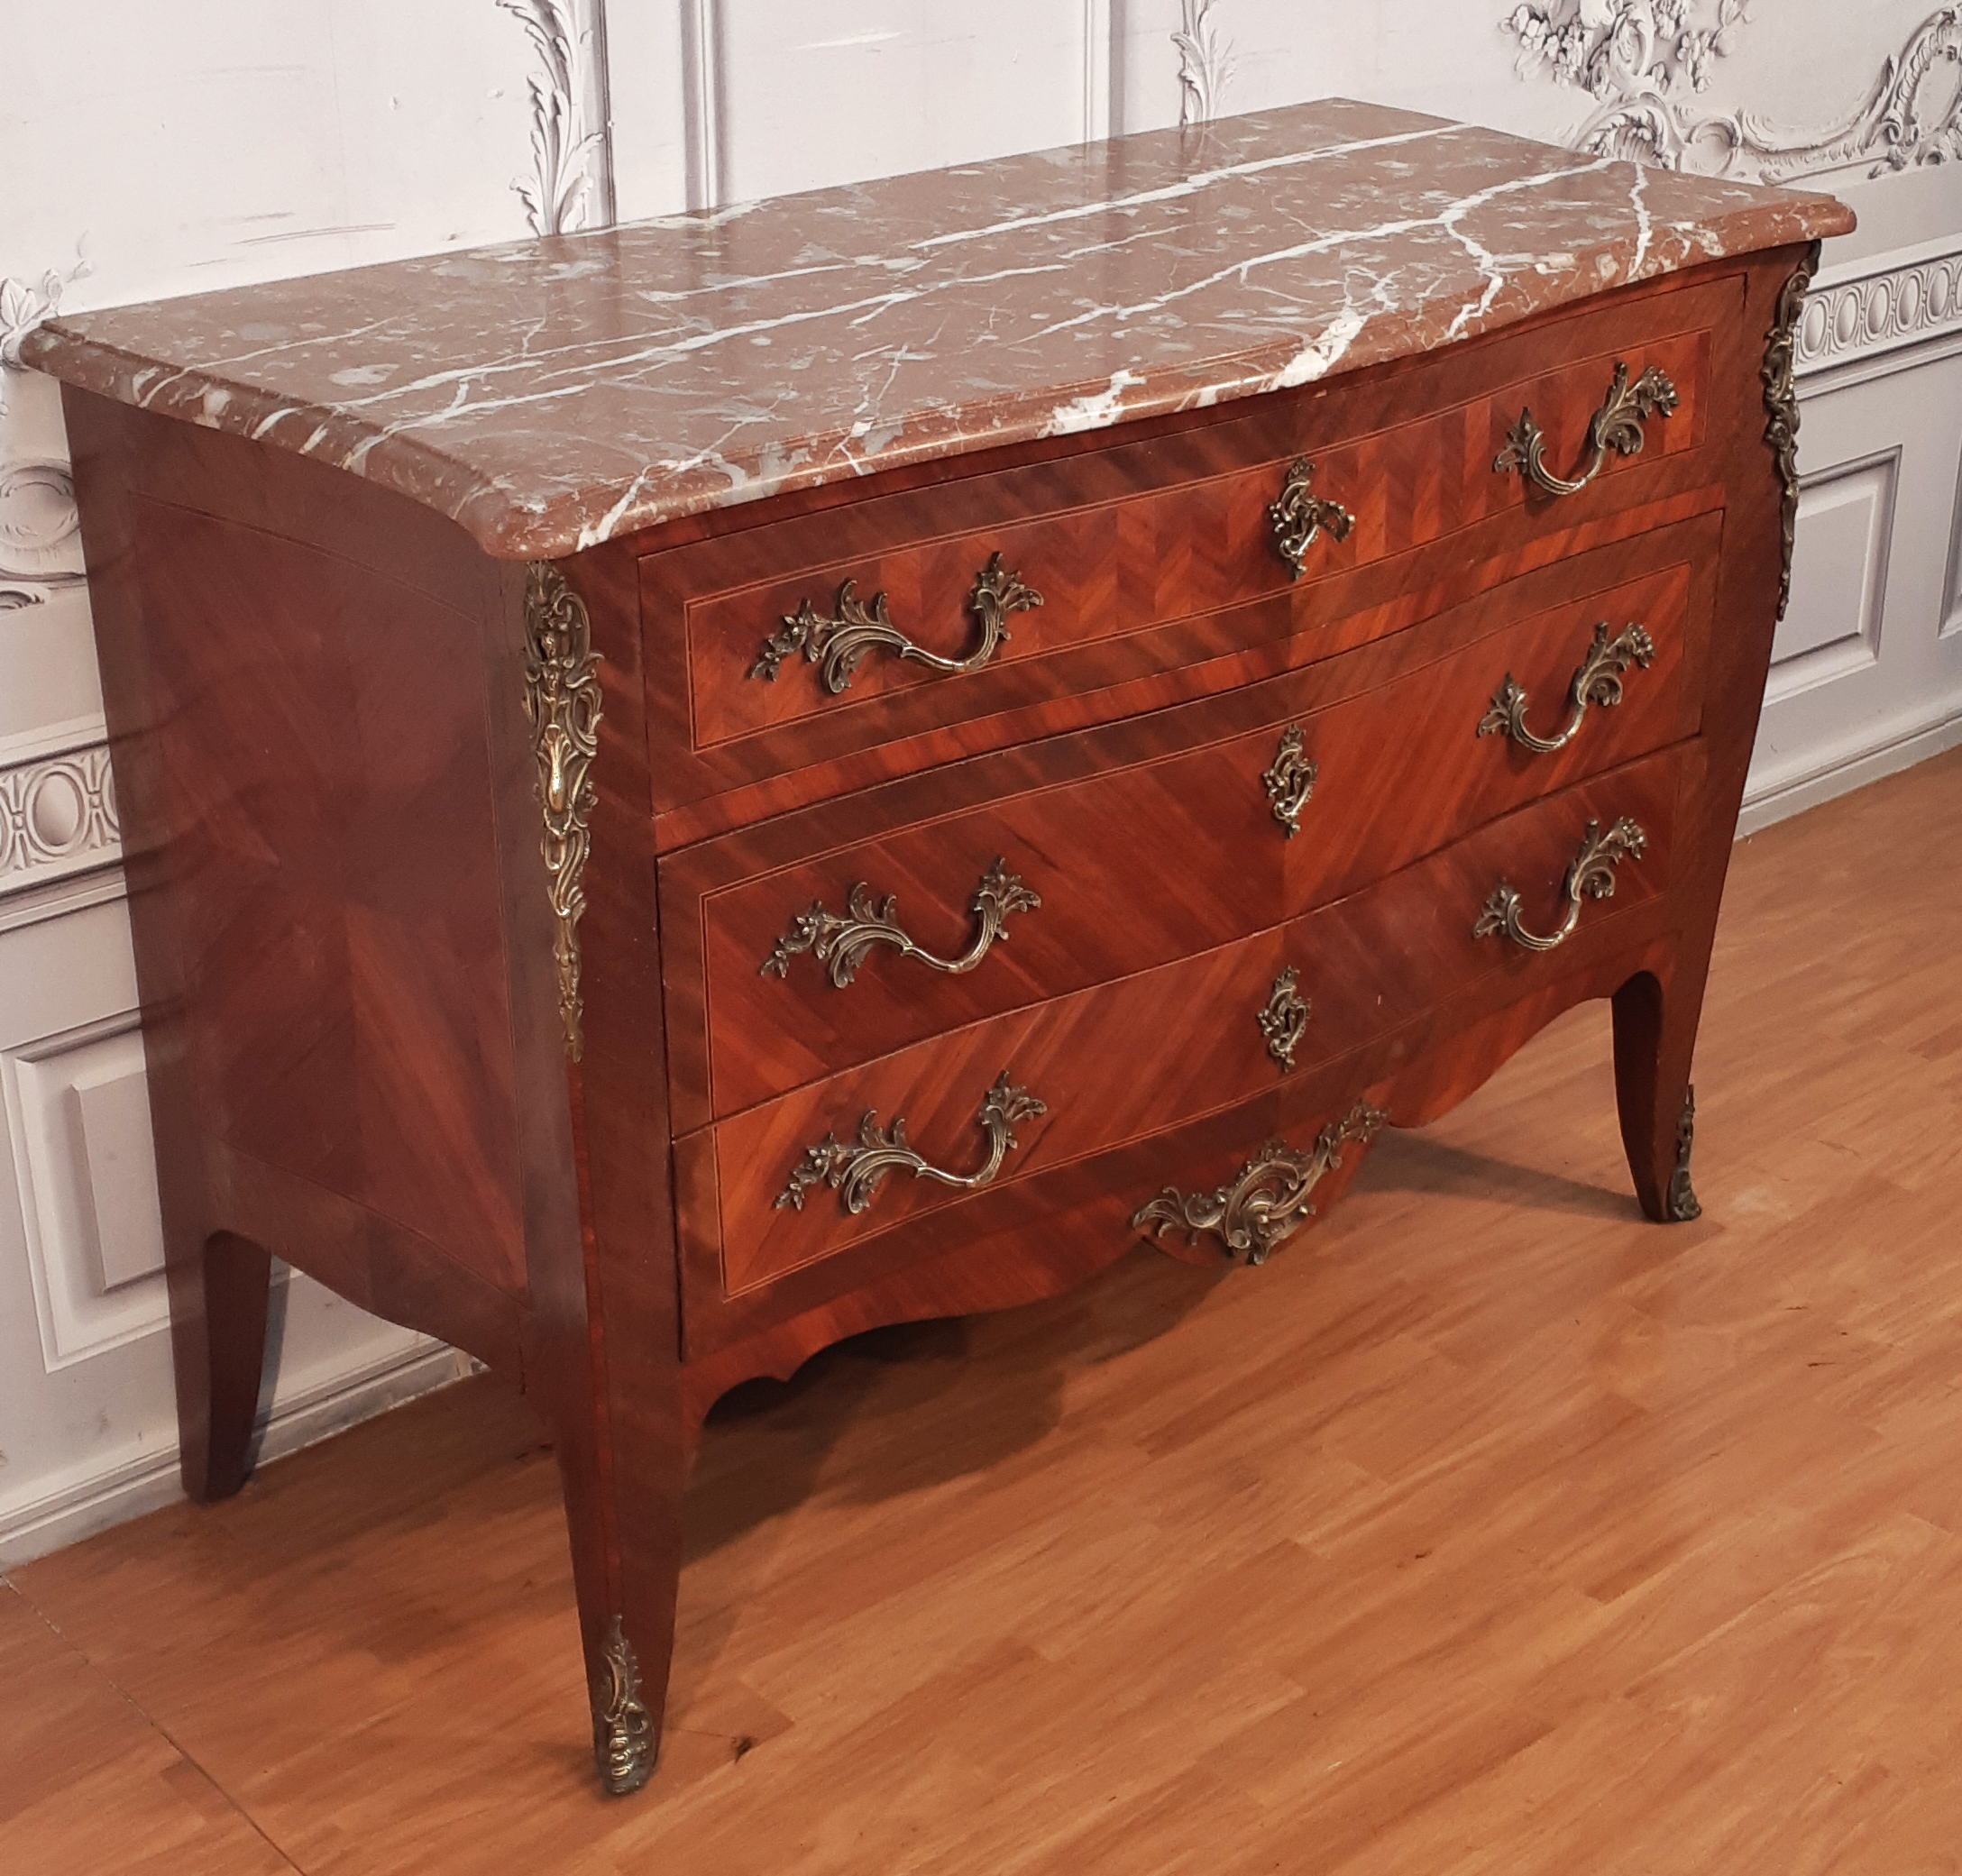 LOUIS XV STYLE MARBLE TOP INLAID 35e82a